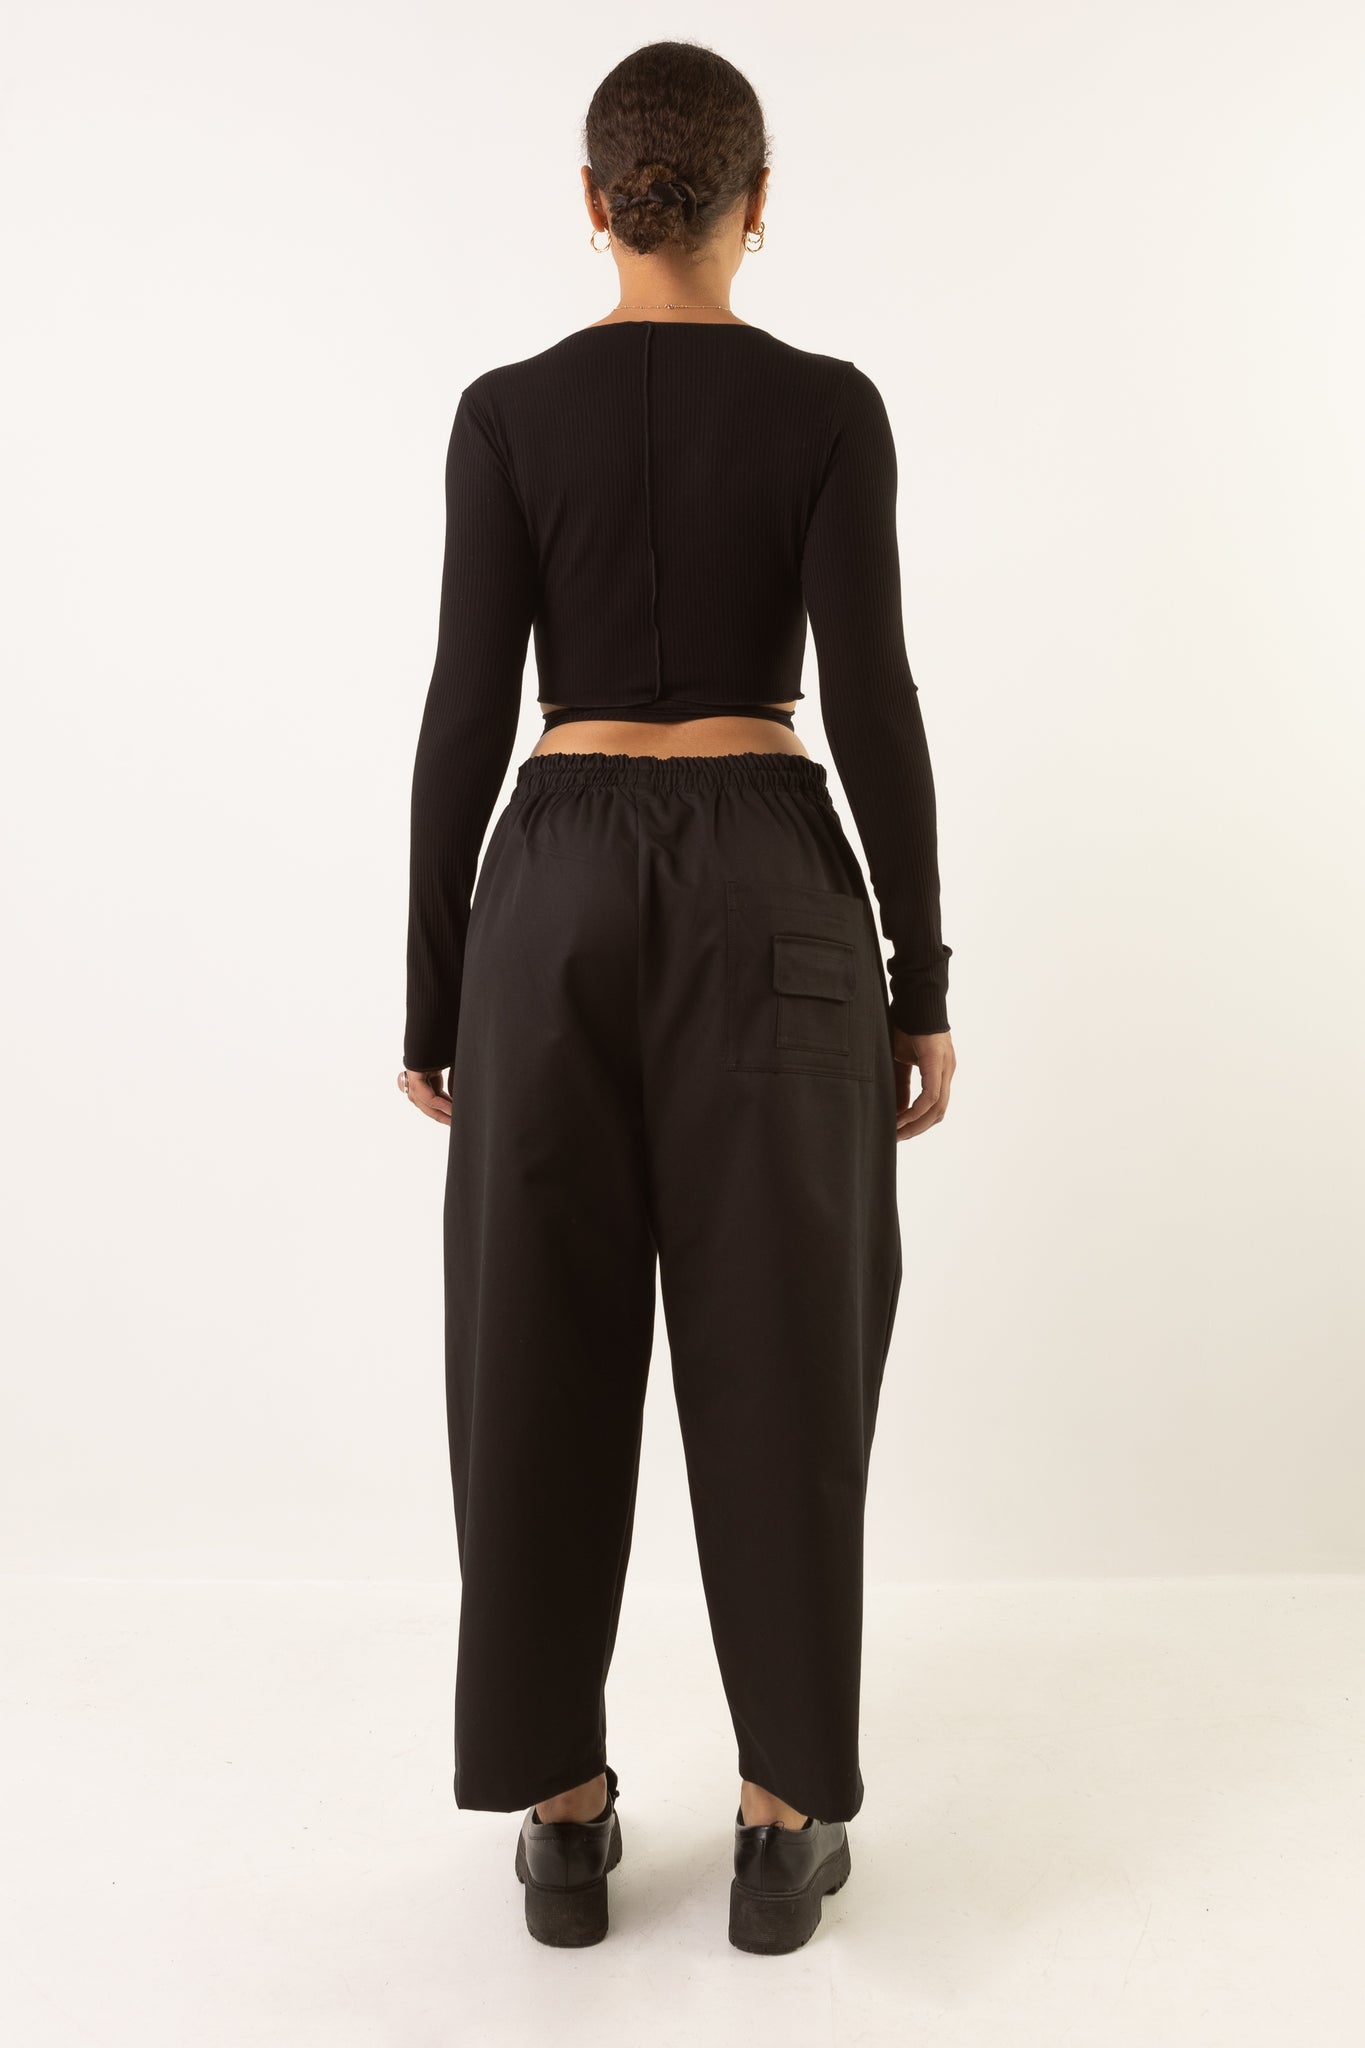 DIONYSUS CROPPED CARGO PANT - MERCY HOUSE